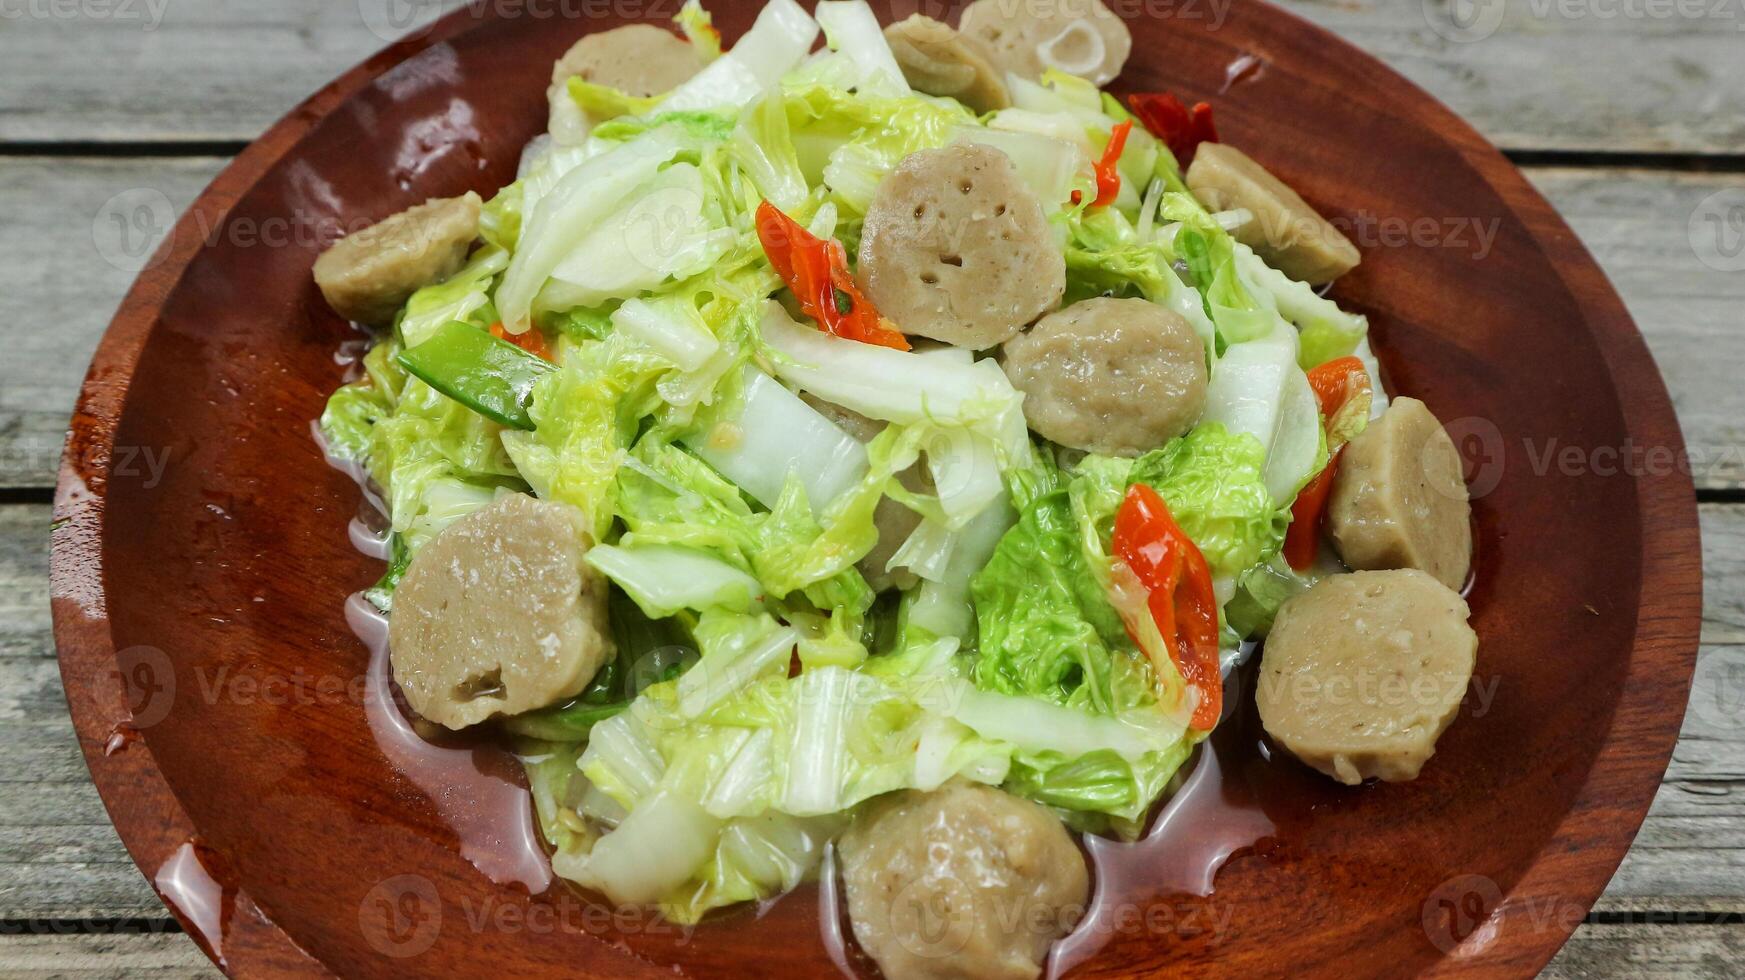 Indonesian cuisine, Tumis napa cabbage - Indonesian Spicy stir fry napa cabbage with meatball, typical Indonesian daily homedish, served in white bowl over brown wooden background photo